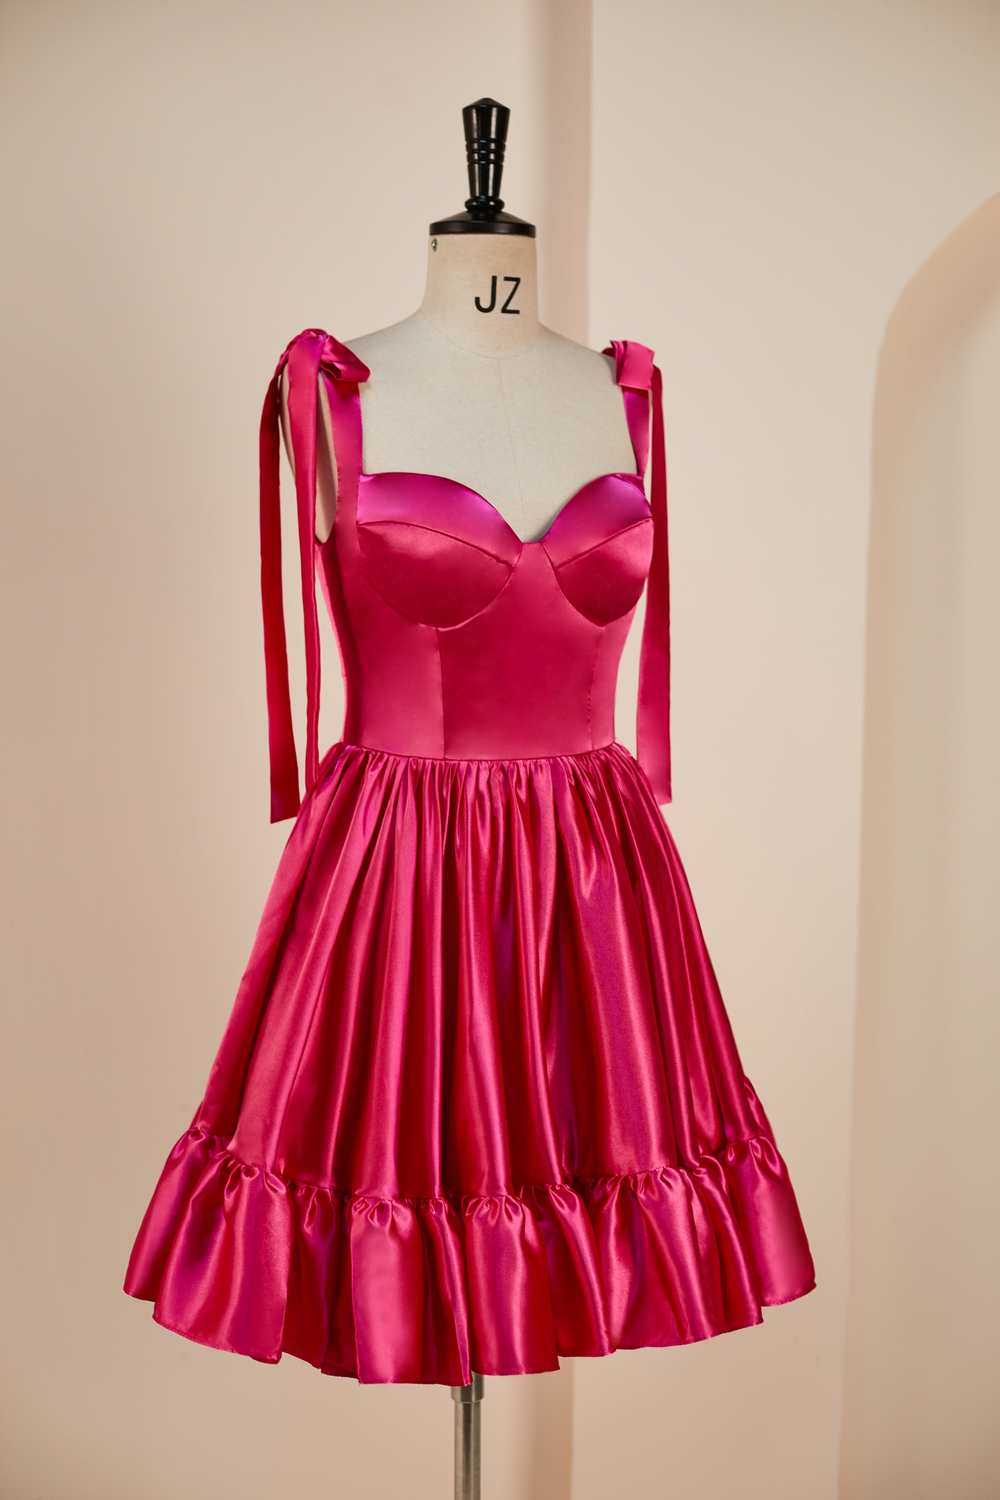 Party Dresses Near Me, Rose Pink A-line Bow Tie Straps Ruffled Satin Homecoming Dress